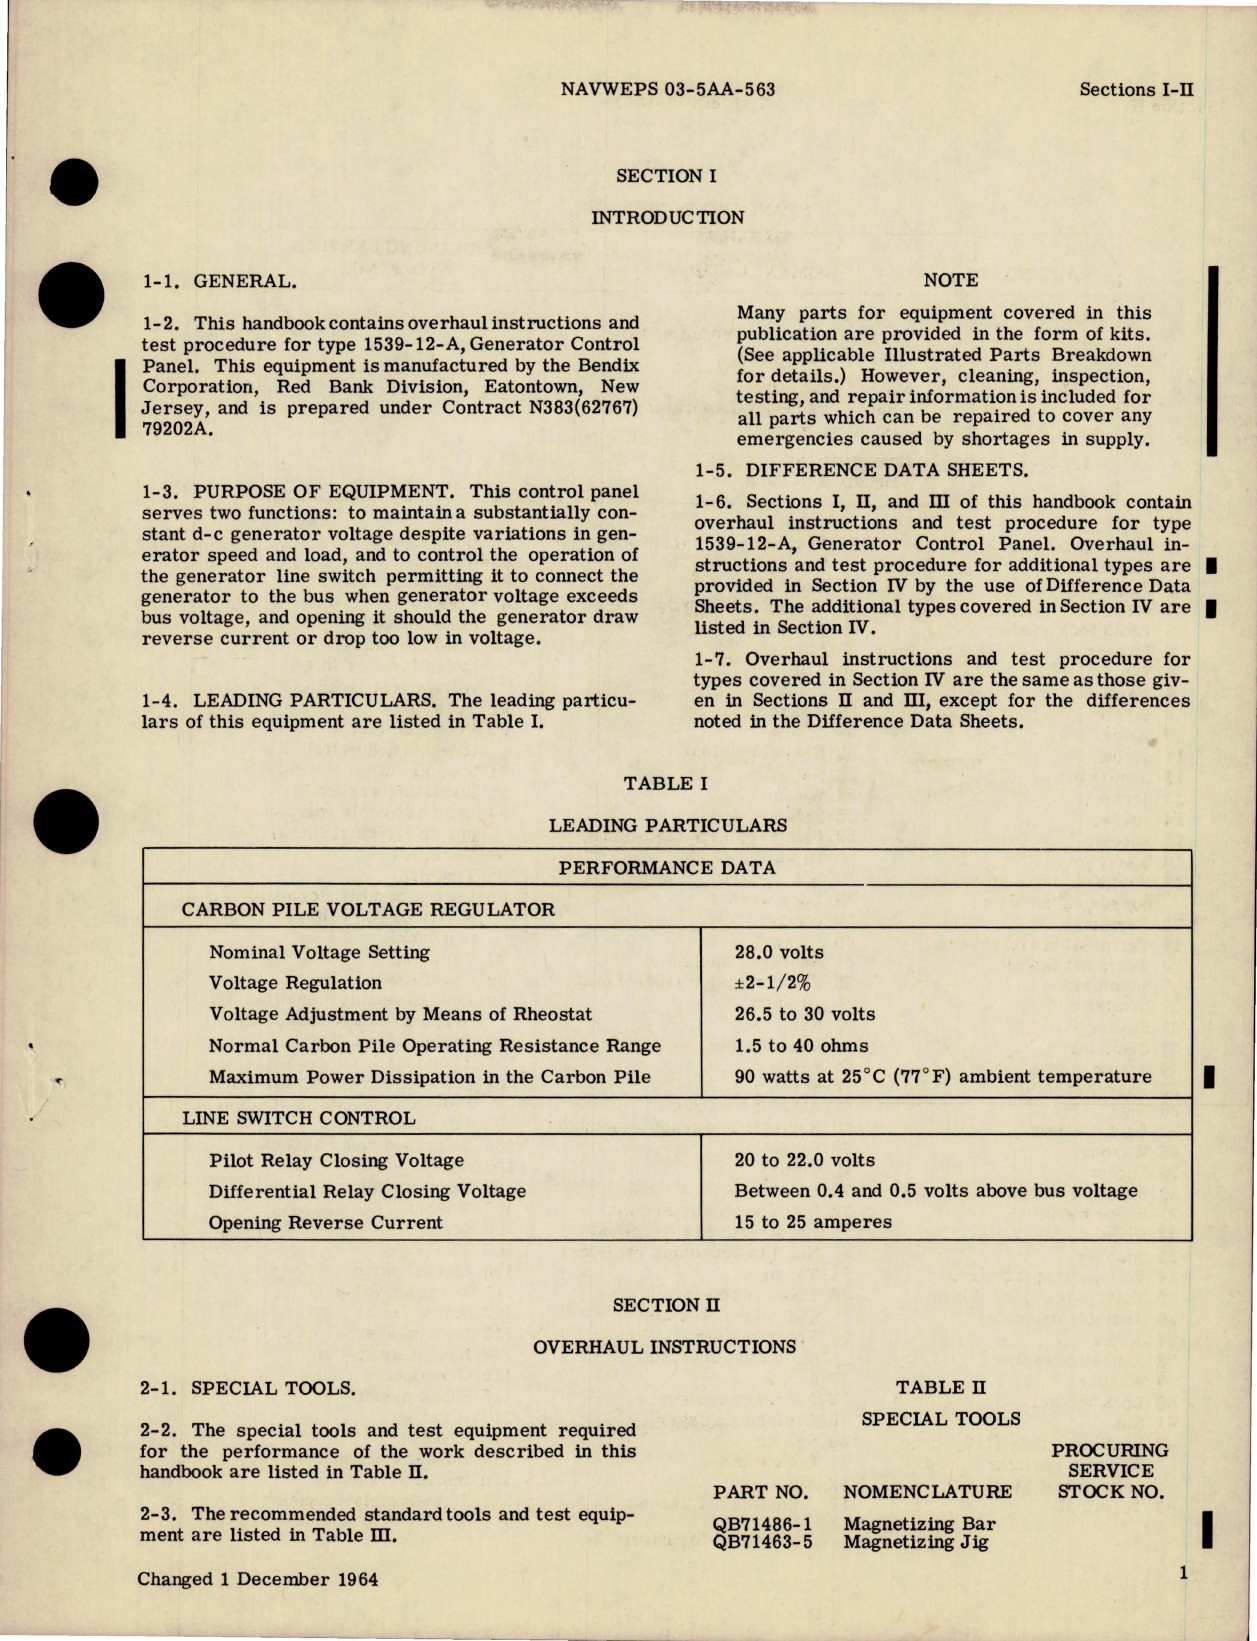 Sample page 5 from AirCorps Library document: Overhaul Instructions for Generator Control Panel - Types 1539-12-A and 1539-11-B 